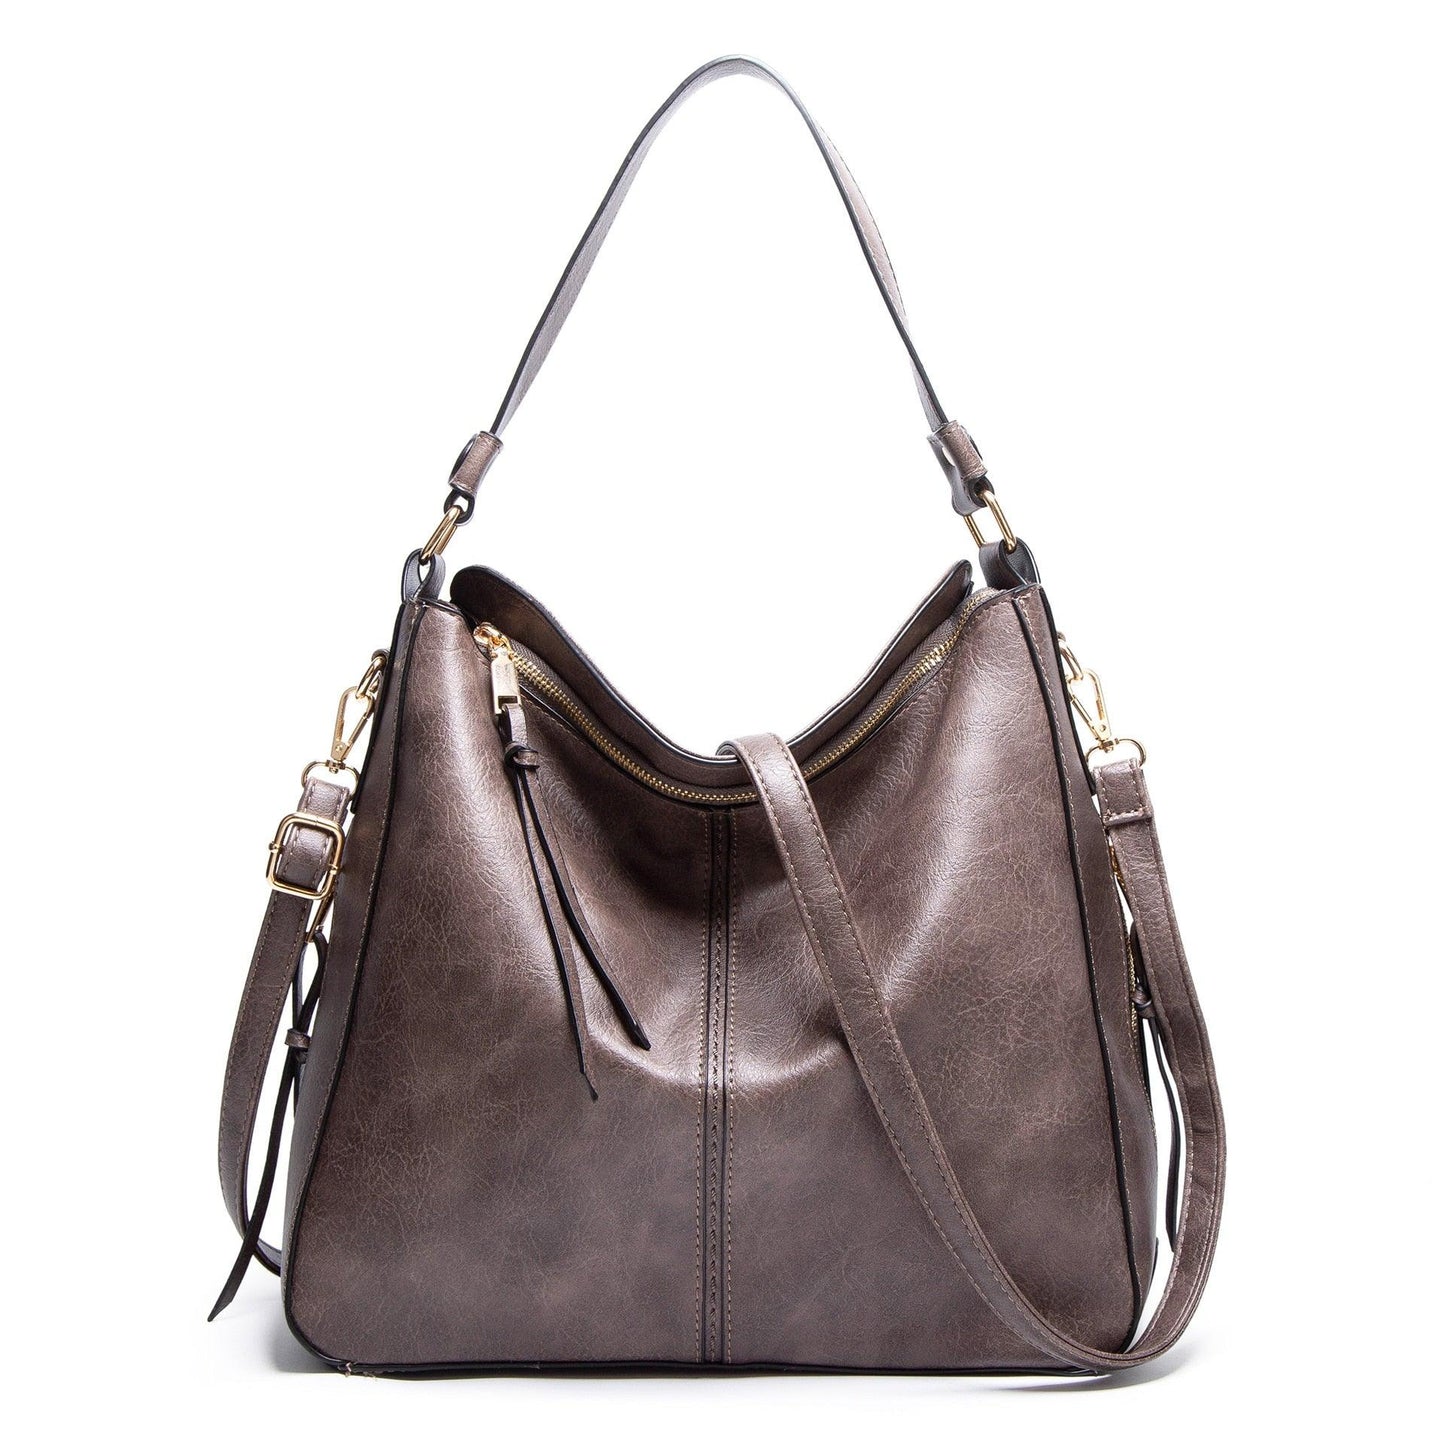 The Hobo Soft Leather Tote Bag - Eccentric You